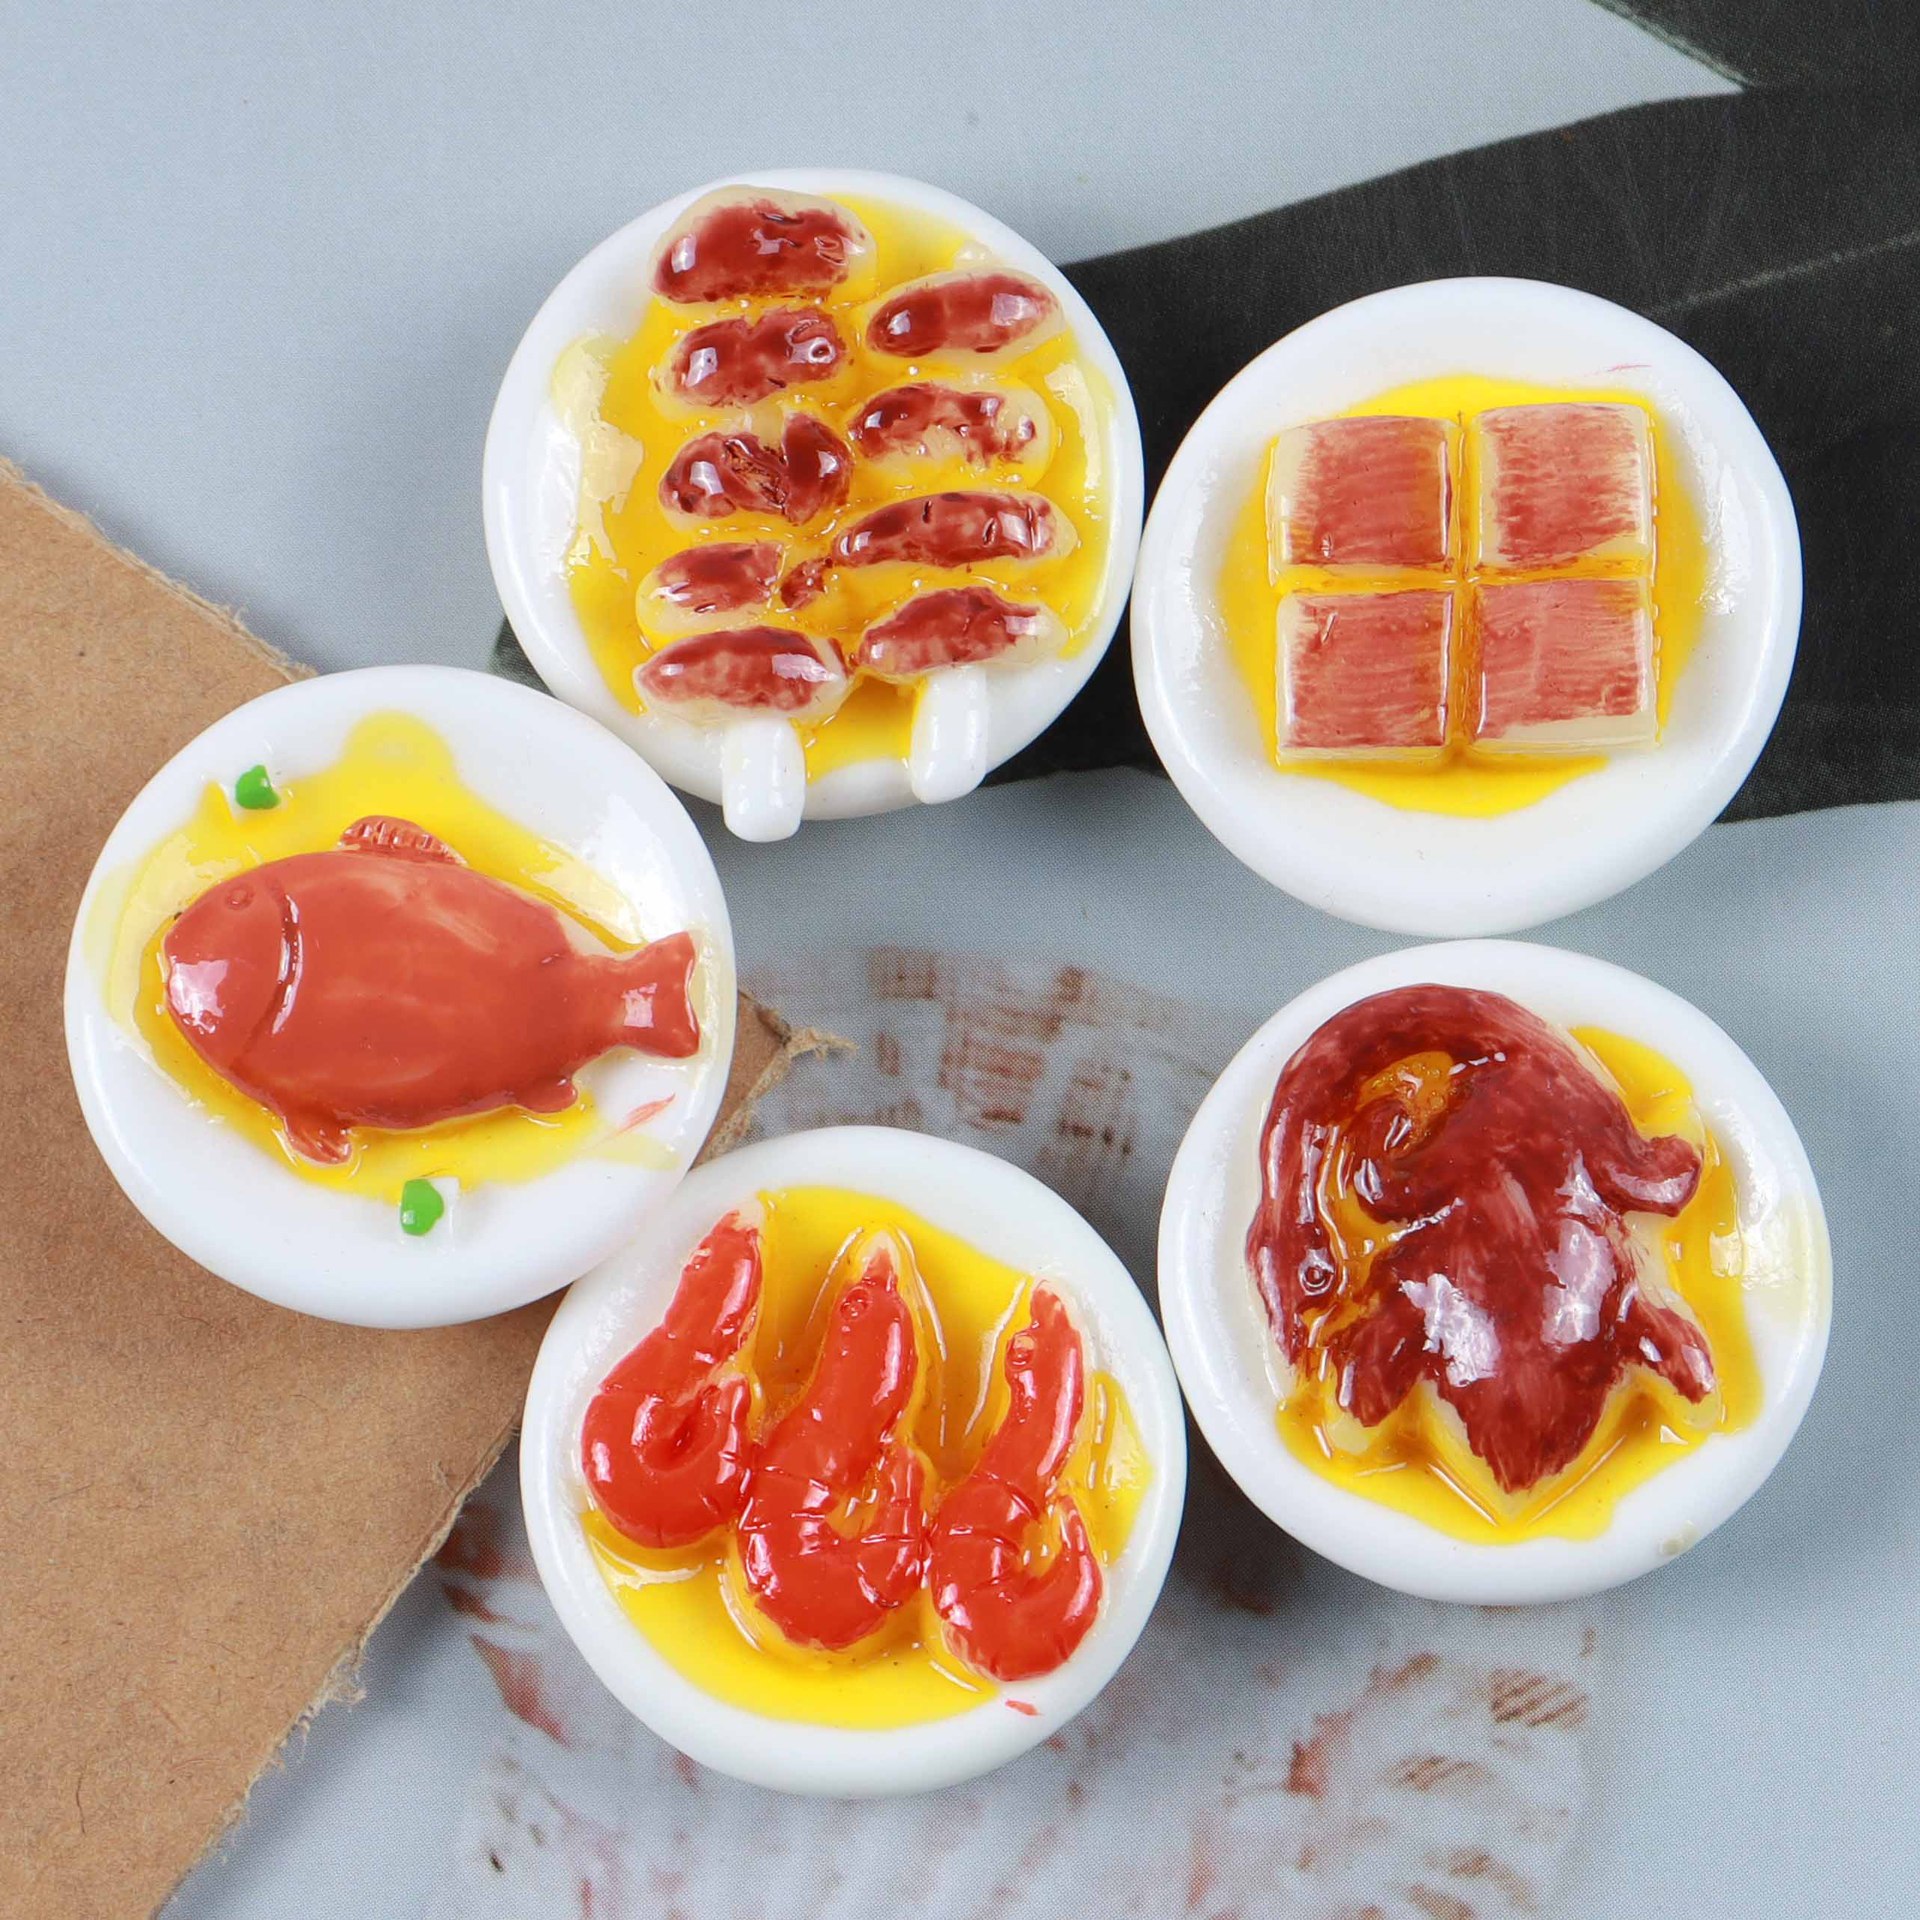 Diy Resin Simulation Cute Miniature Food and Play Plate Roast Chicken Fish Fruit Phone Case Hairpin Decorative Material Wholesale